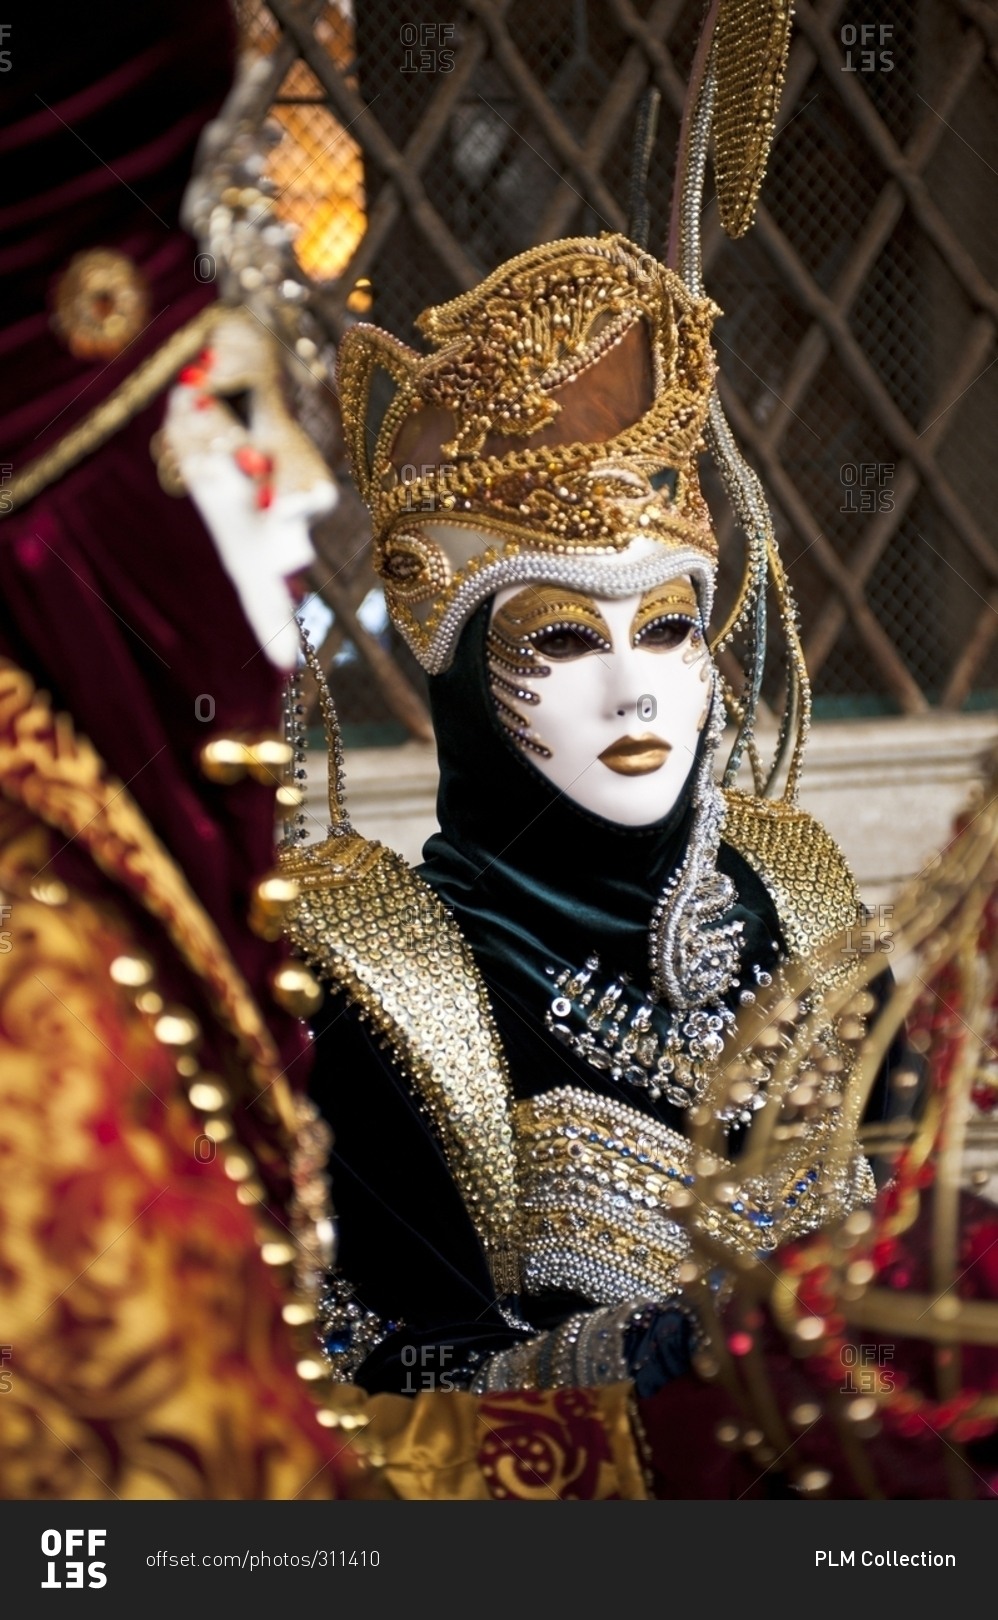 Carnival masks in glittering clothes, Venice, Italy